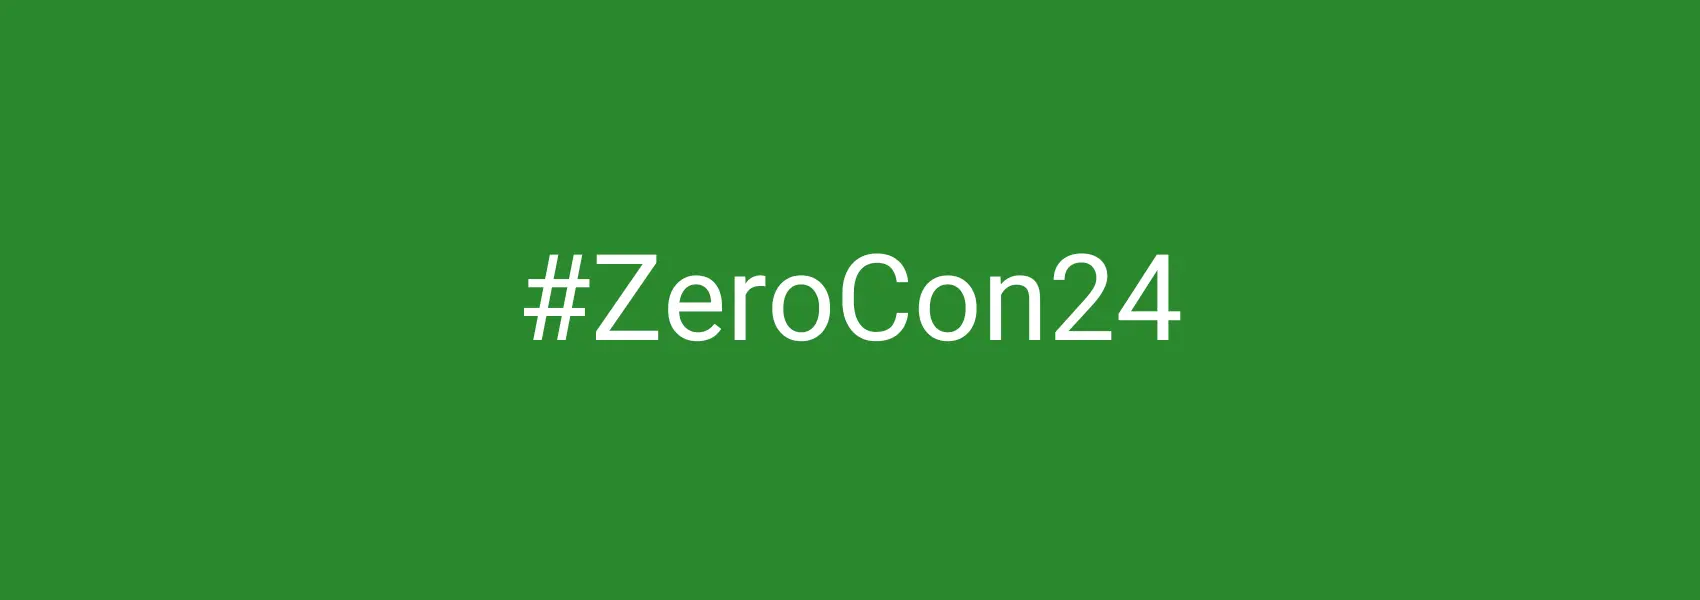 Green background with the conference hashtag #ZeroCon24 in white